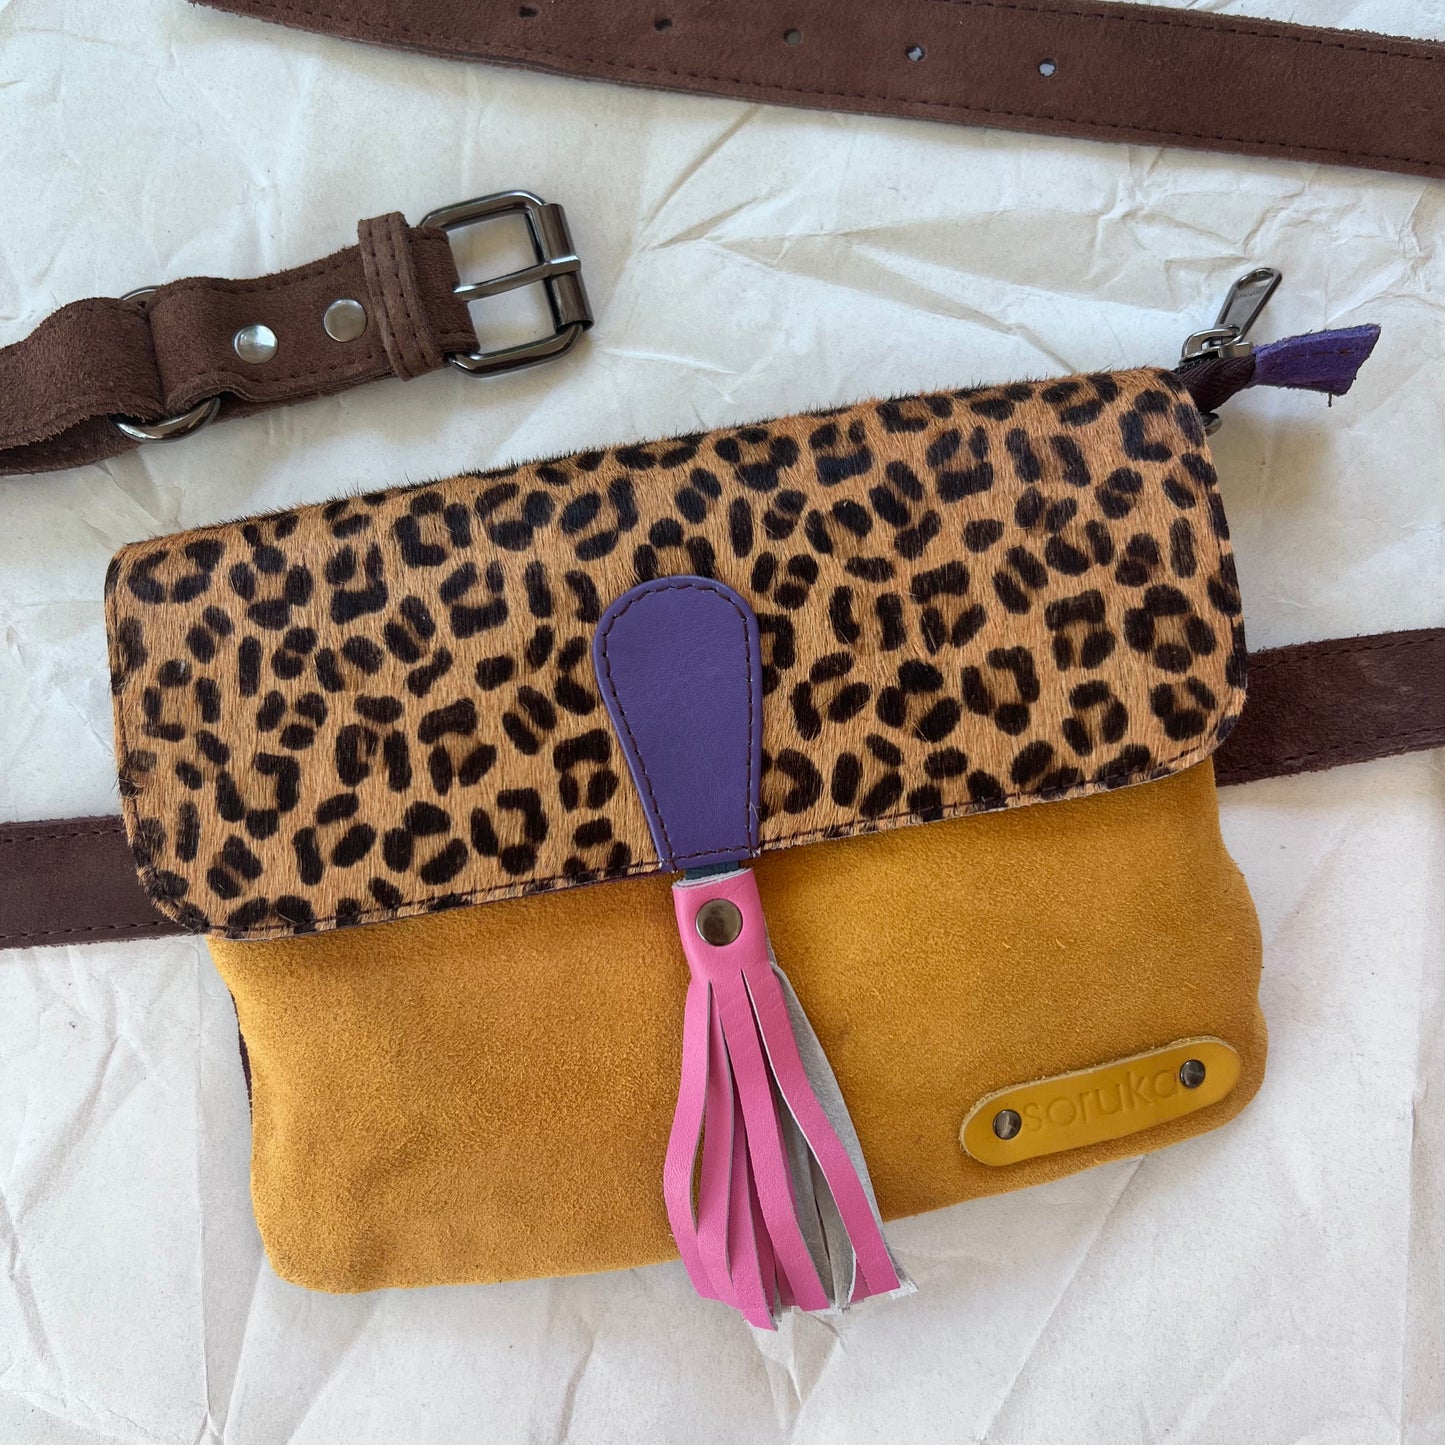 small square bag with yellow suede body, cheetah print flap with pink tassel, and brown belt.